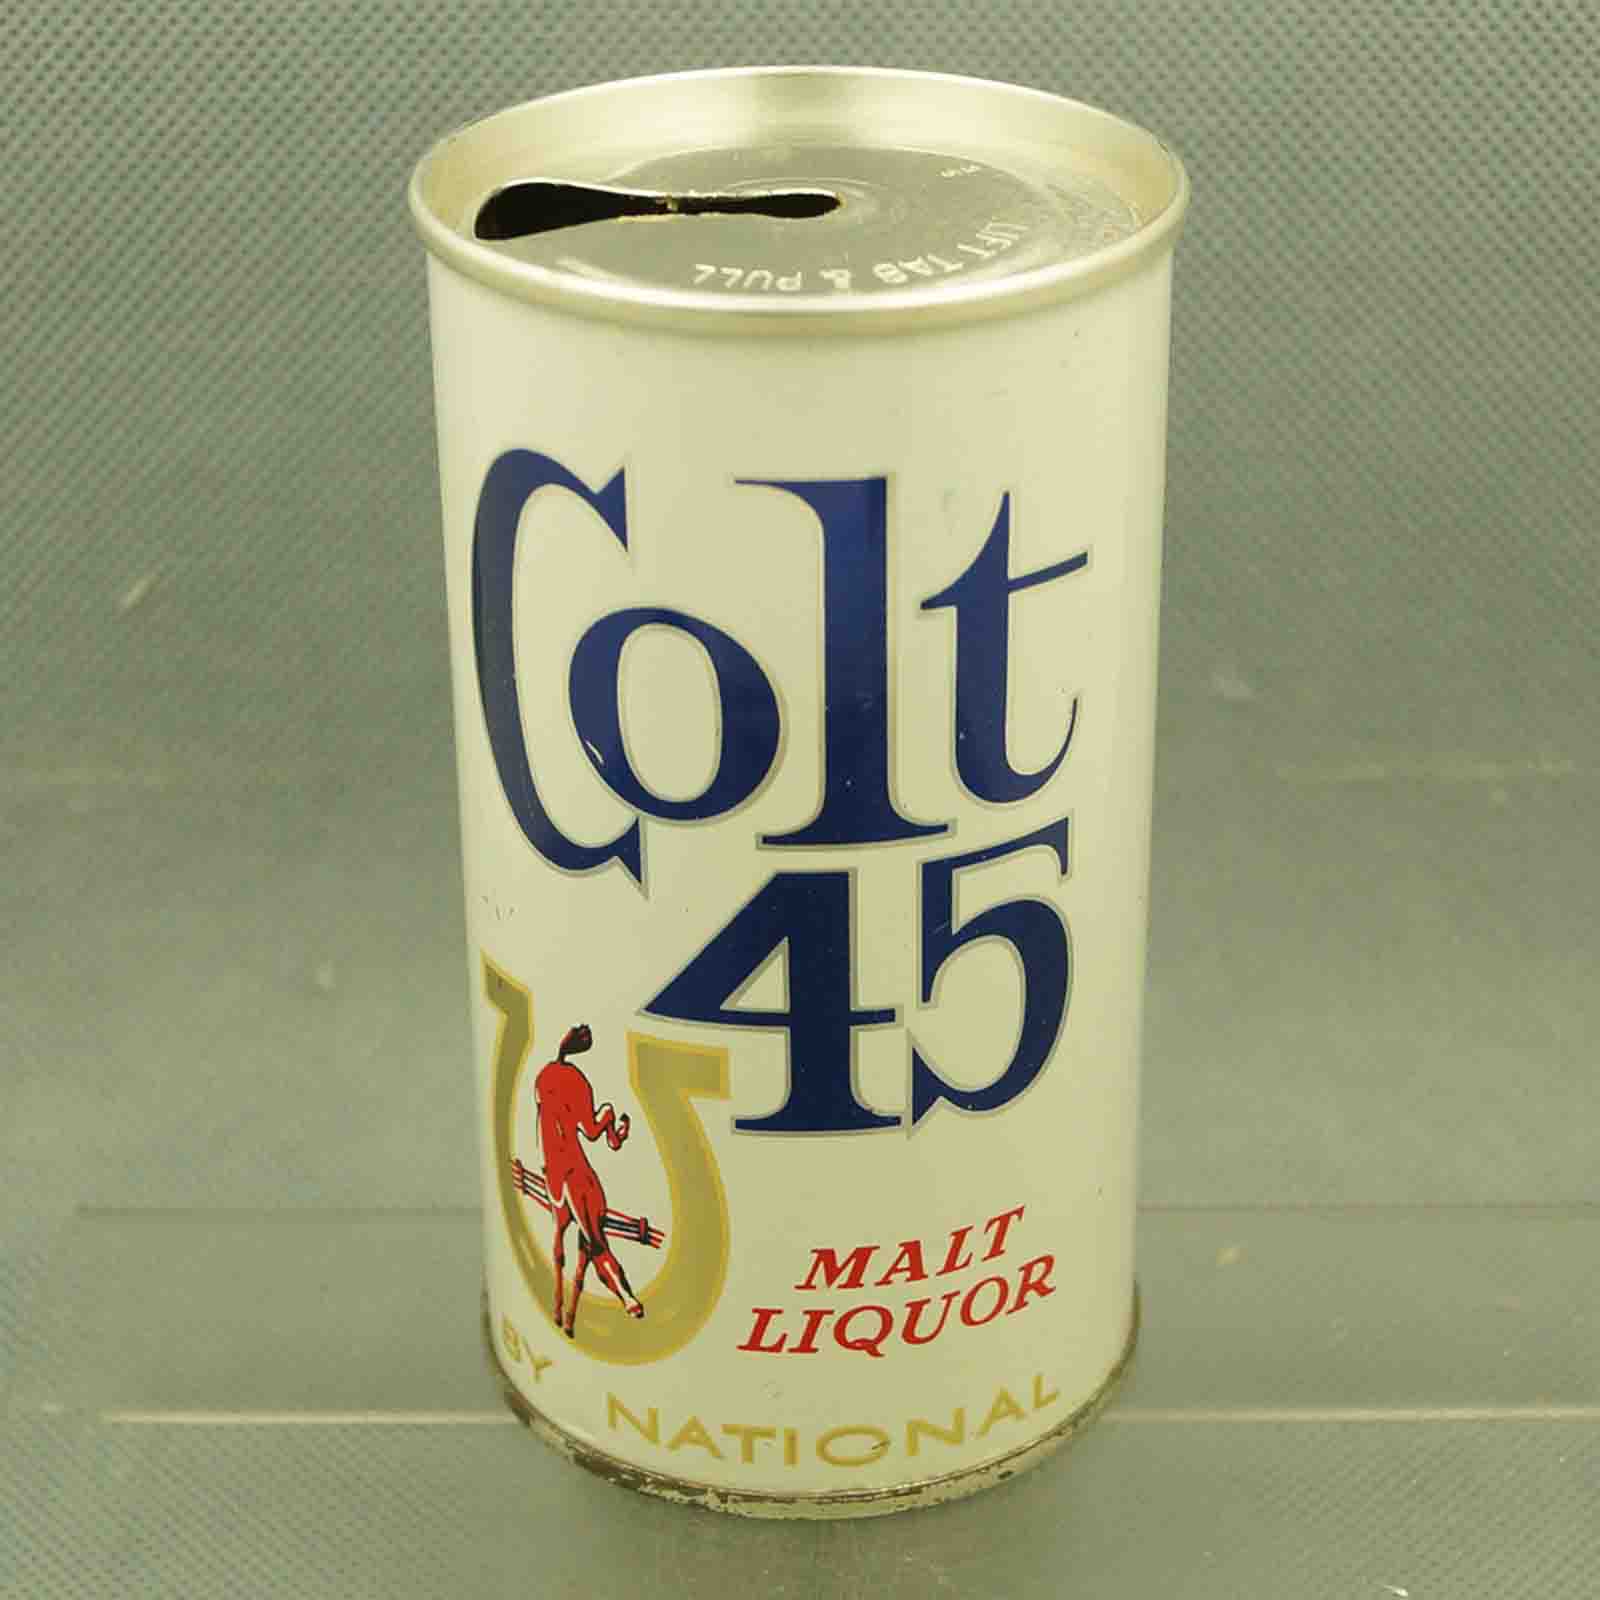 colt 45 56-16 pull tab beer can 1